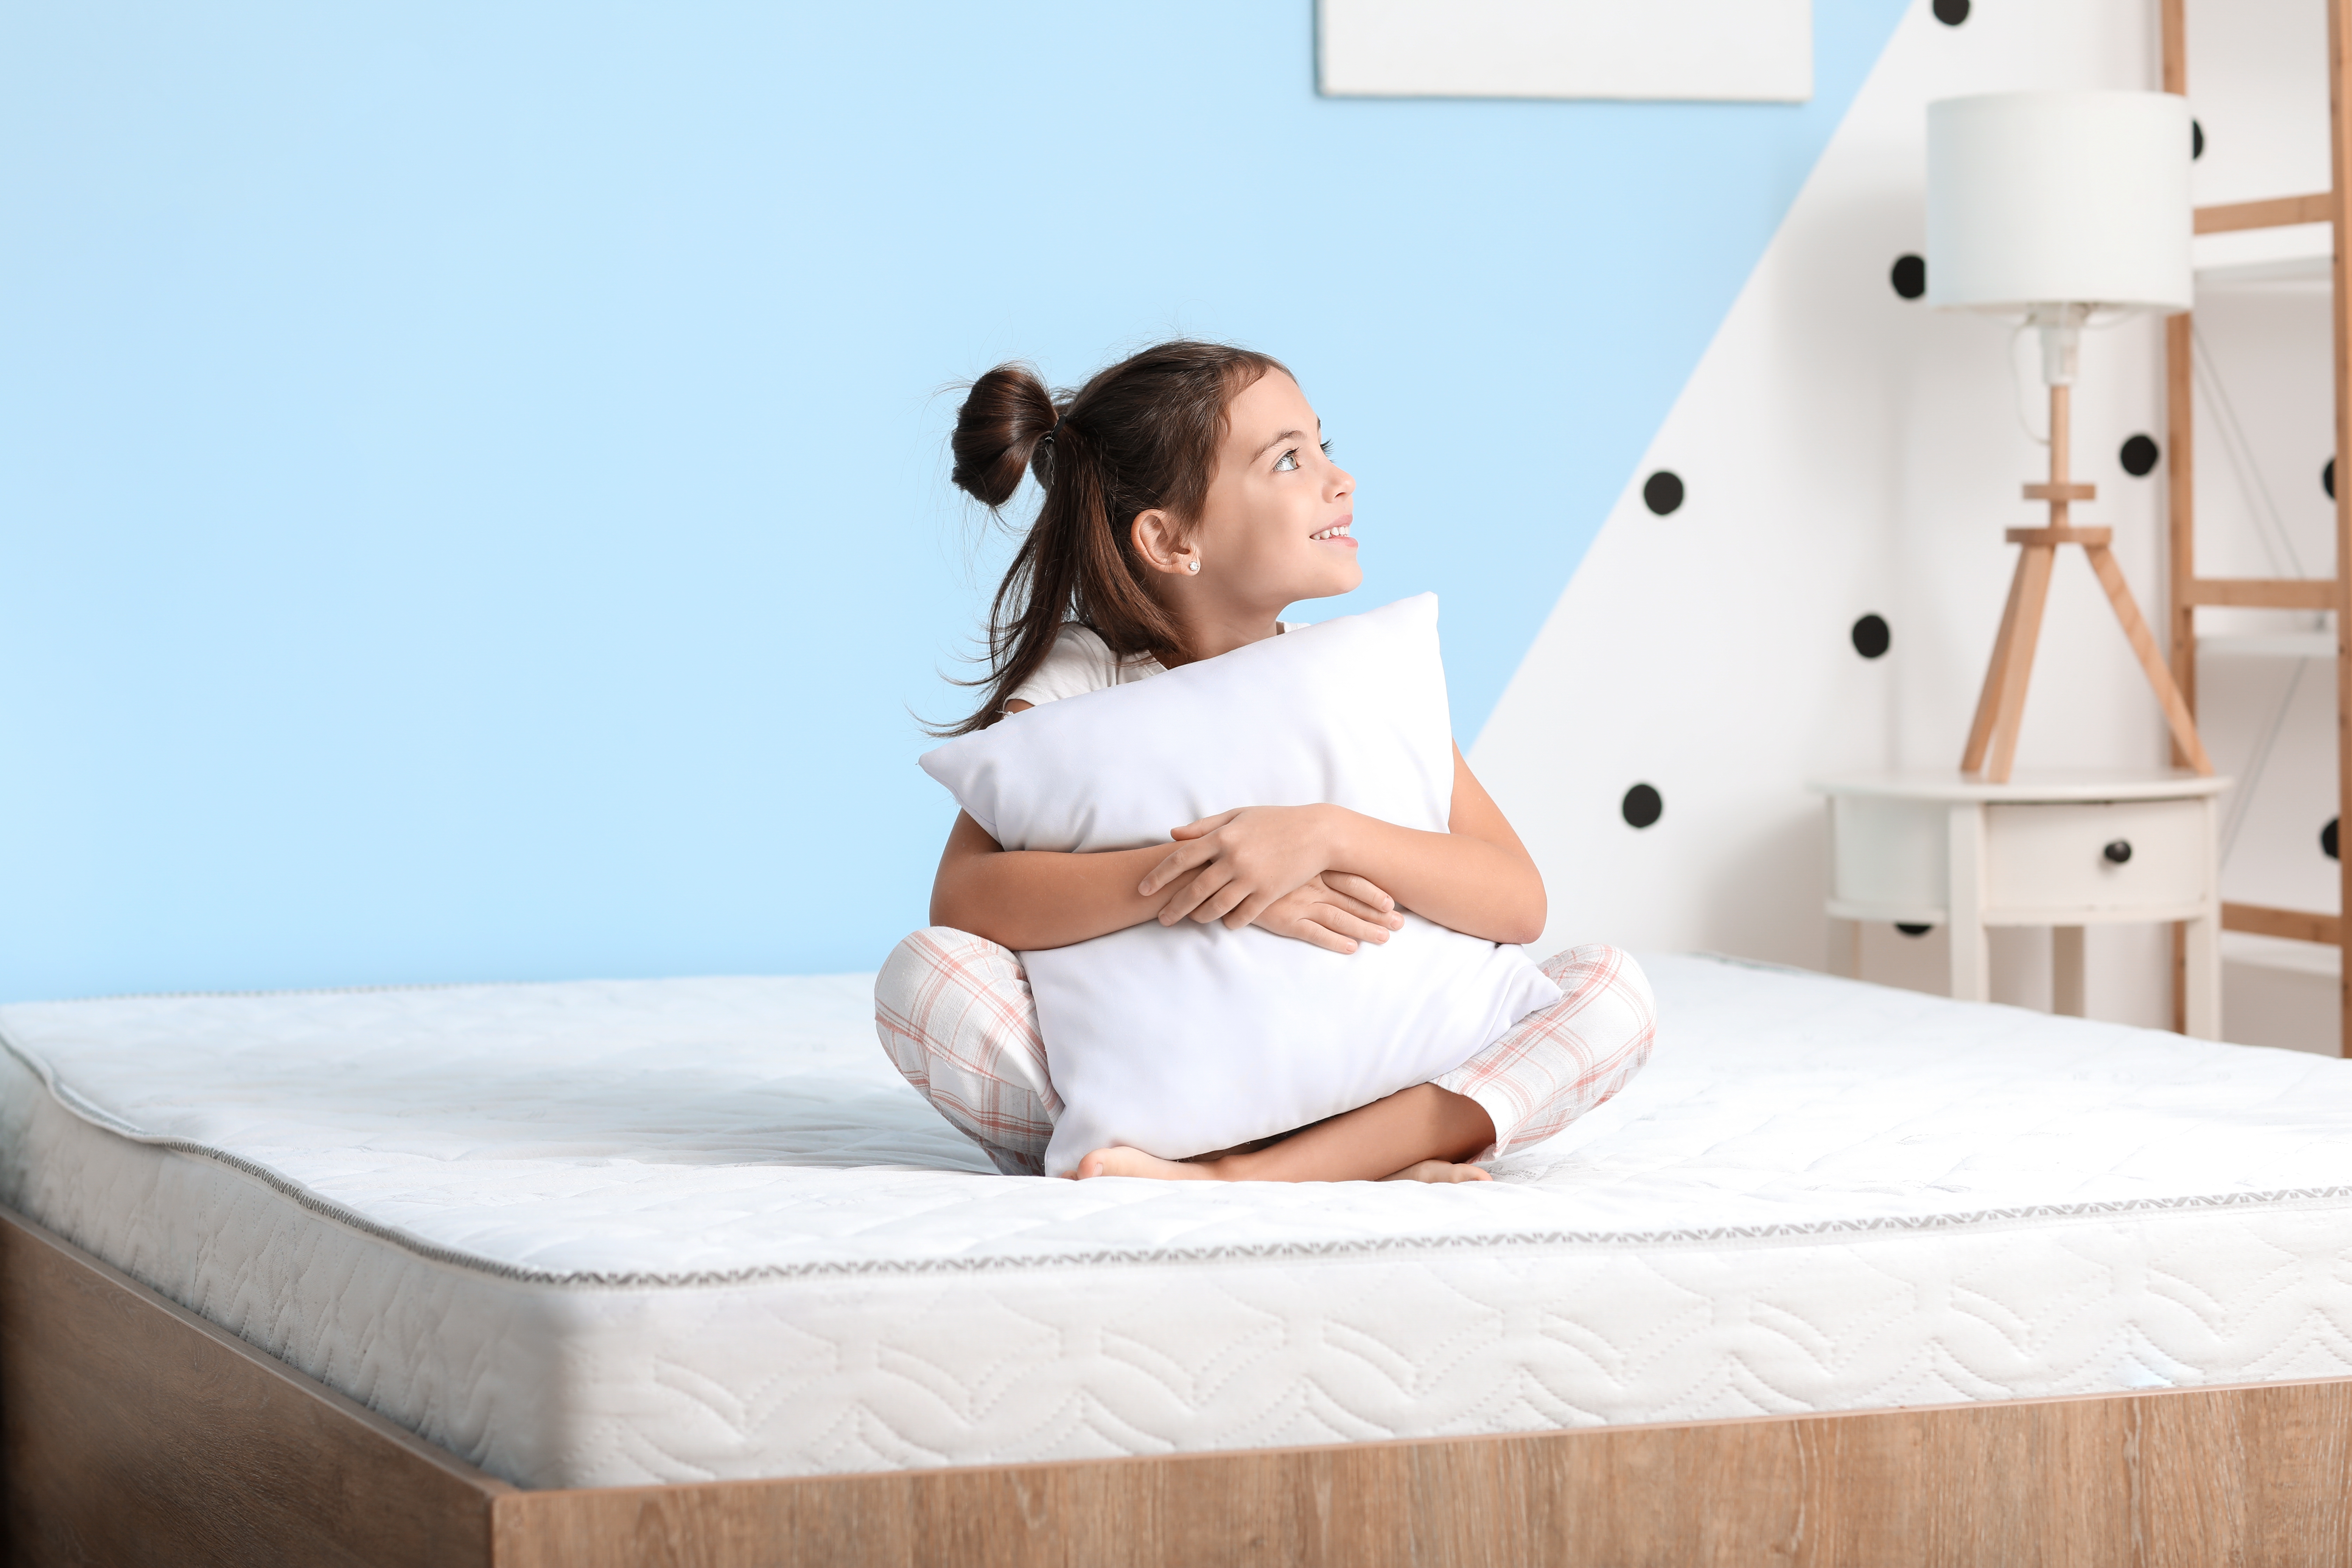 Young girl with brown hair sits on a mattress hugging a pillow